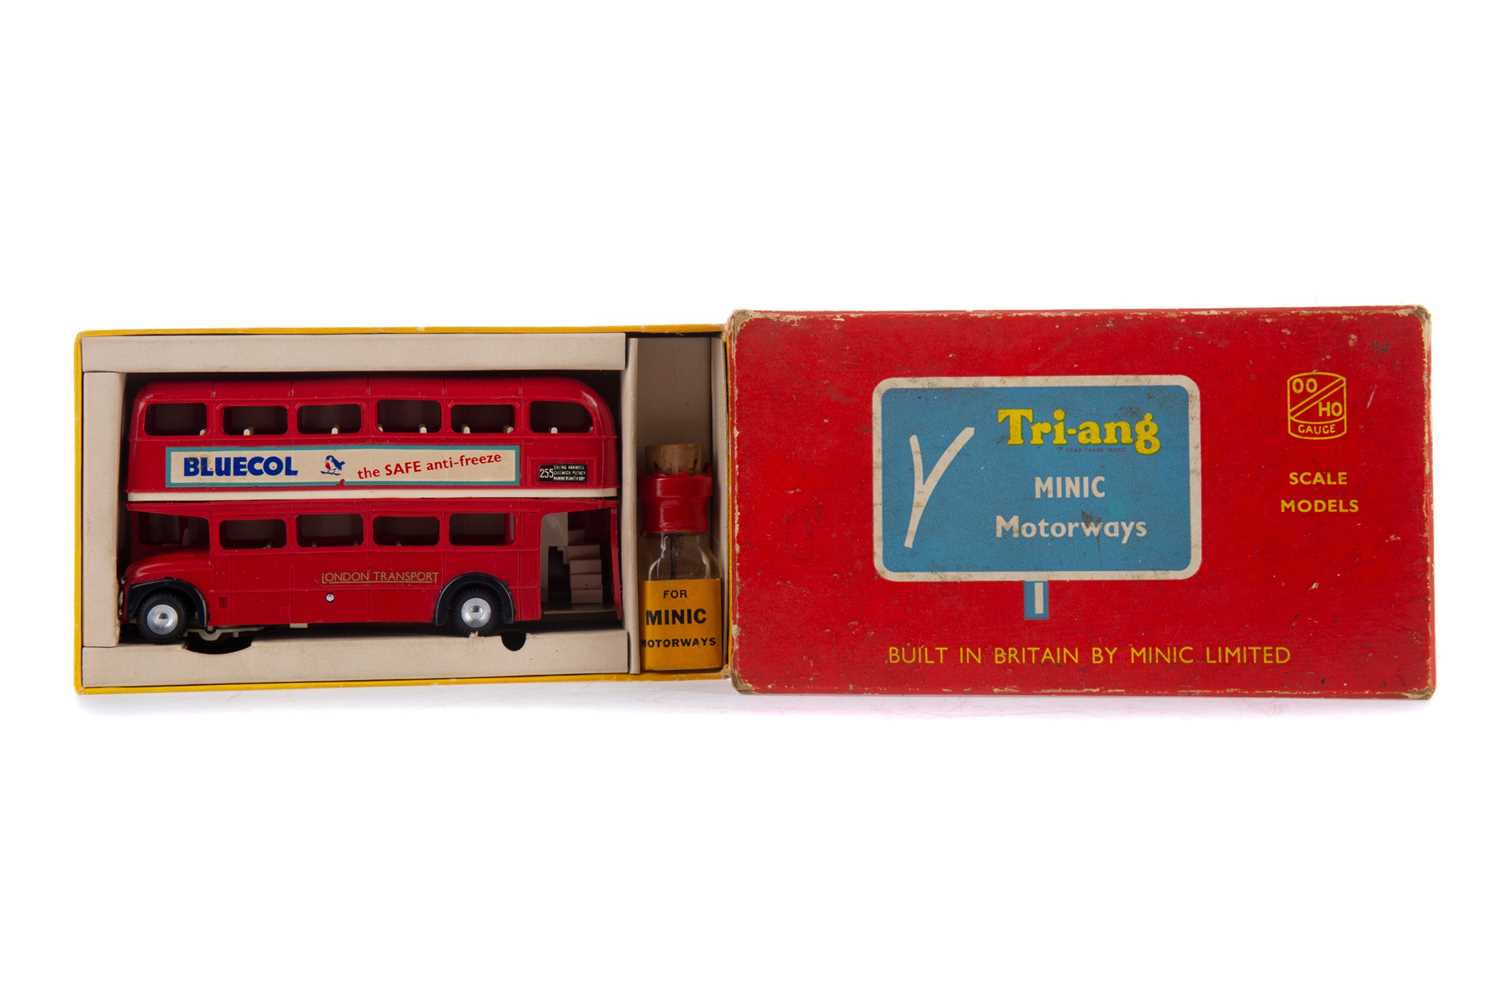 Lot 928 - A TRI-ANG MINIC MOTORWAYS DOUBLE DECKER BUS